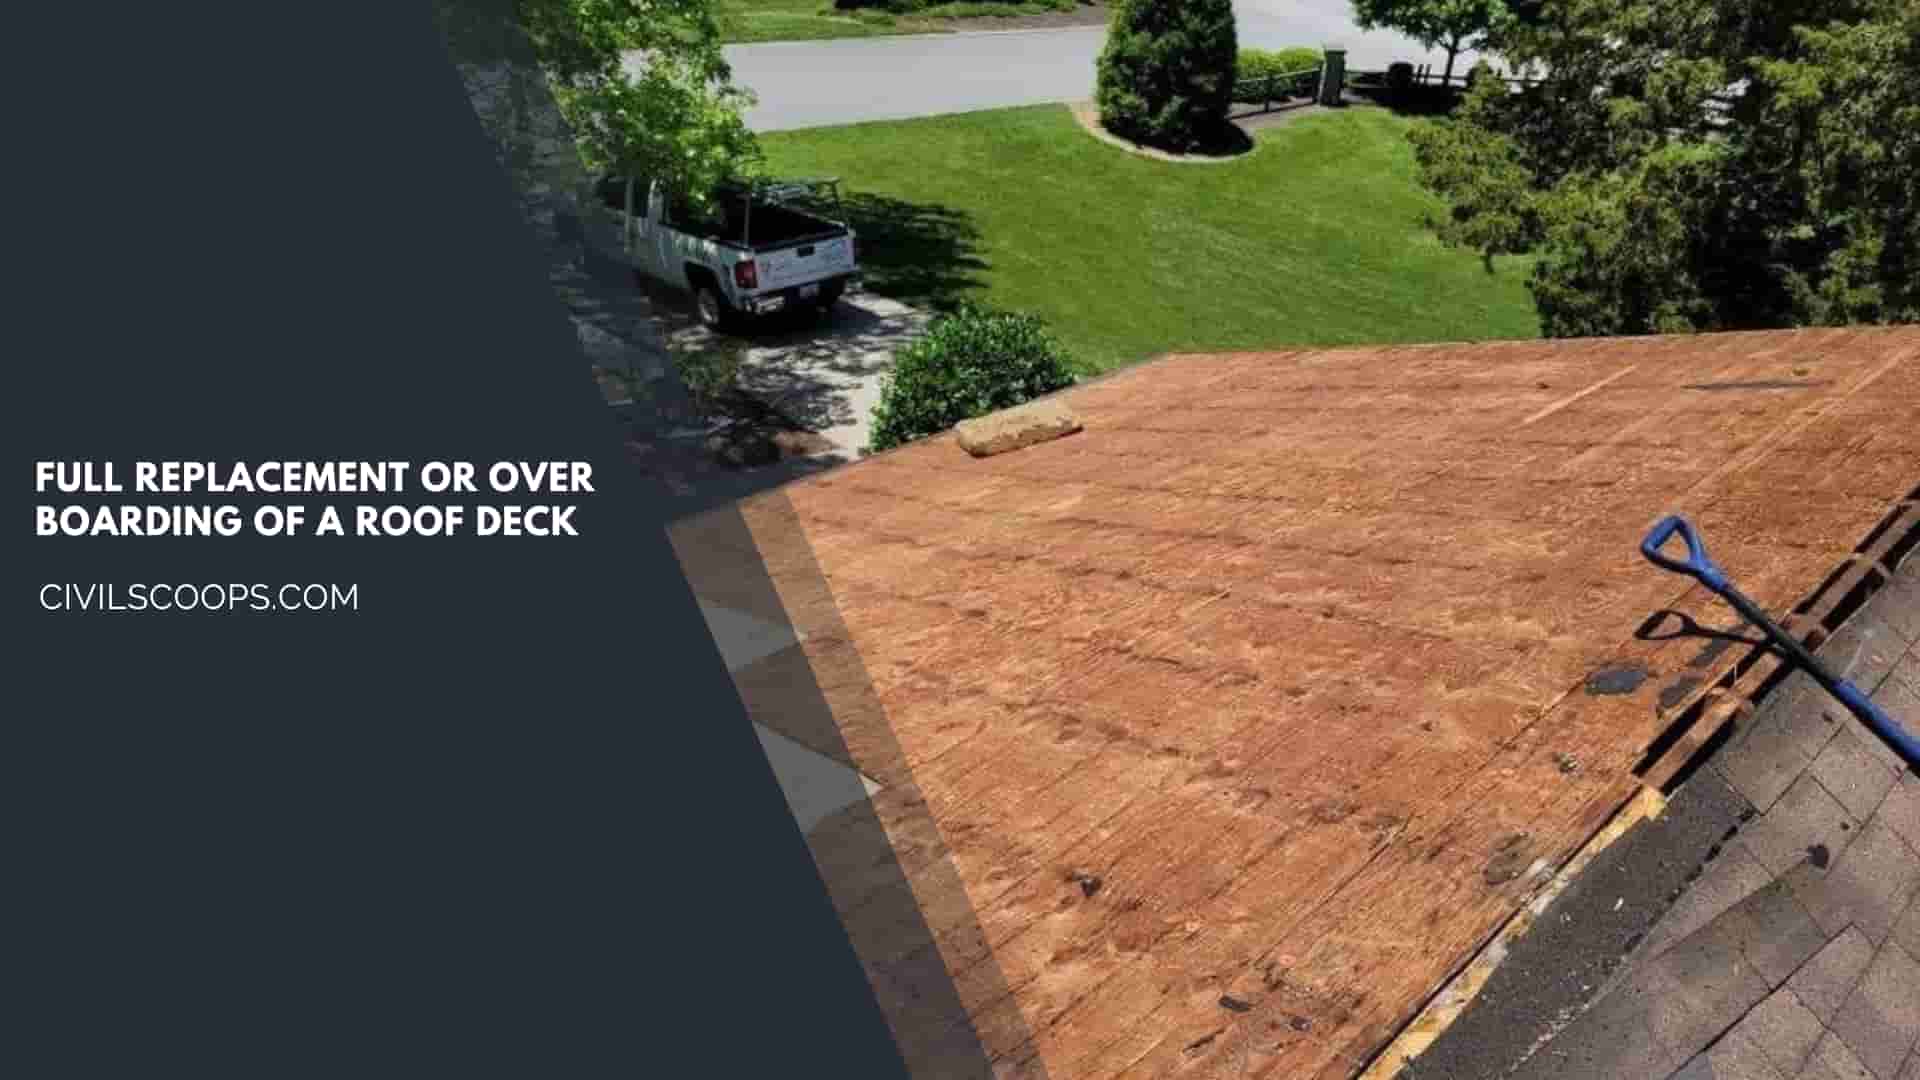 Full Replacement or Over Boarding of a Roof Deck